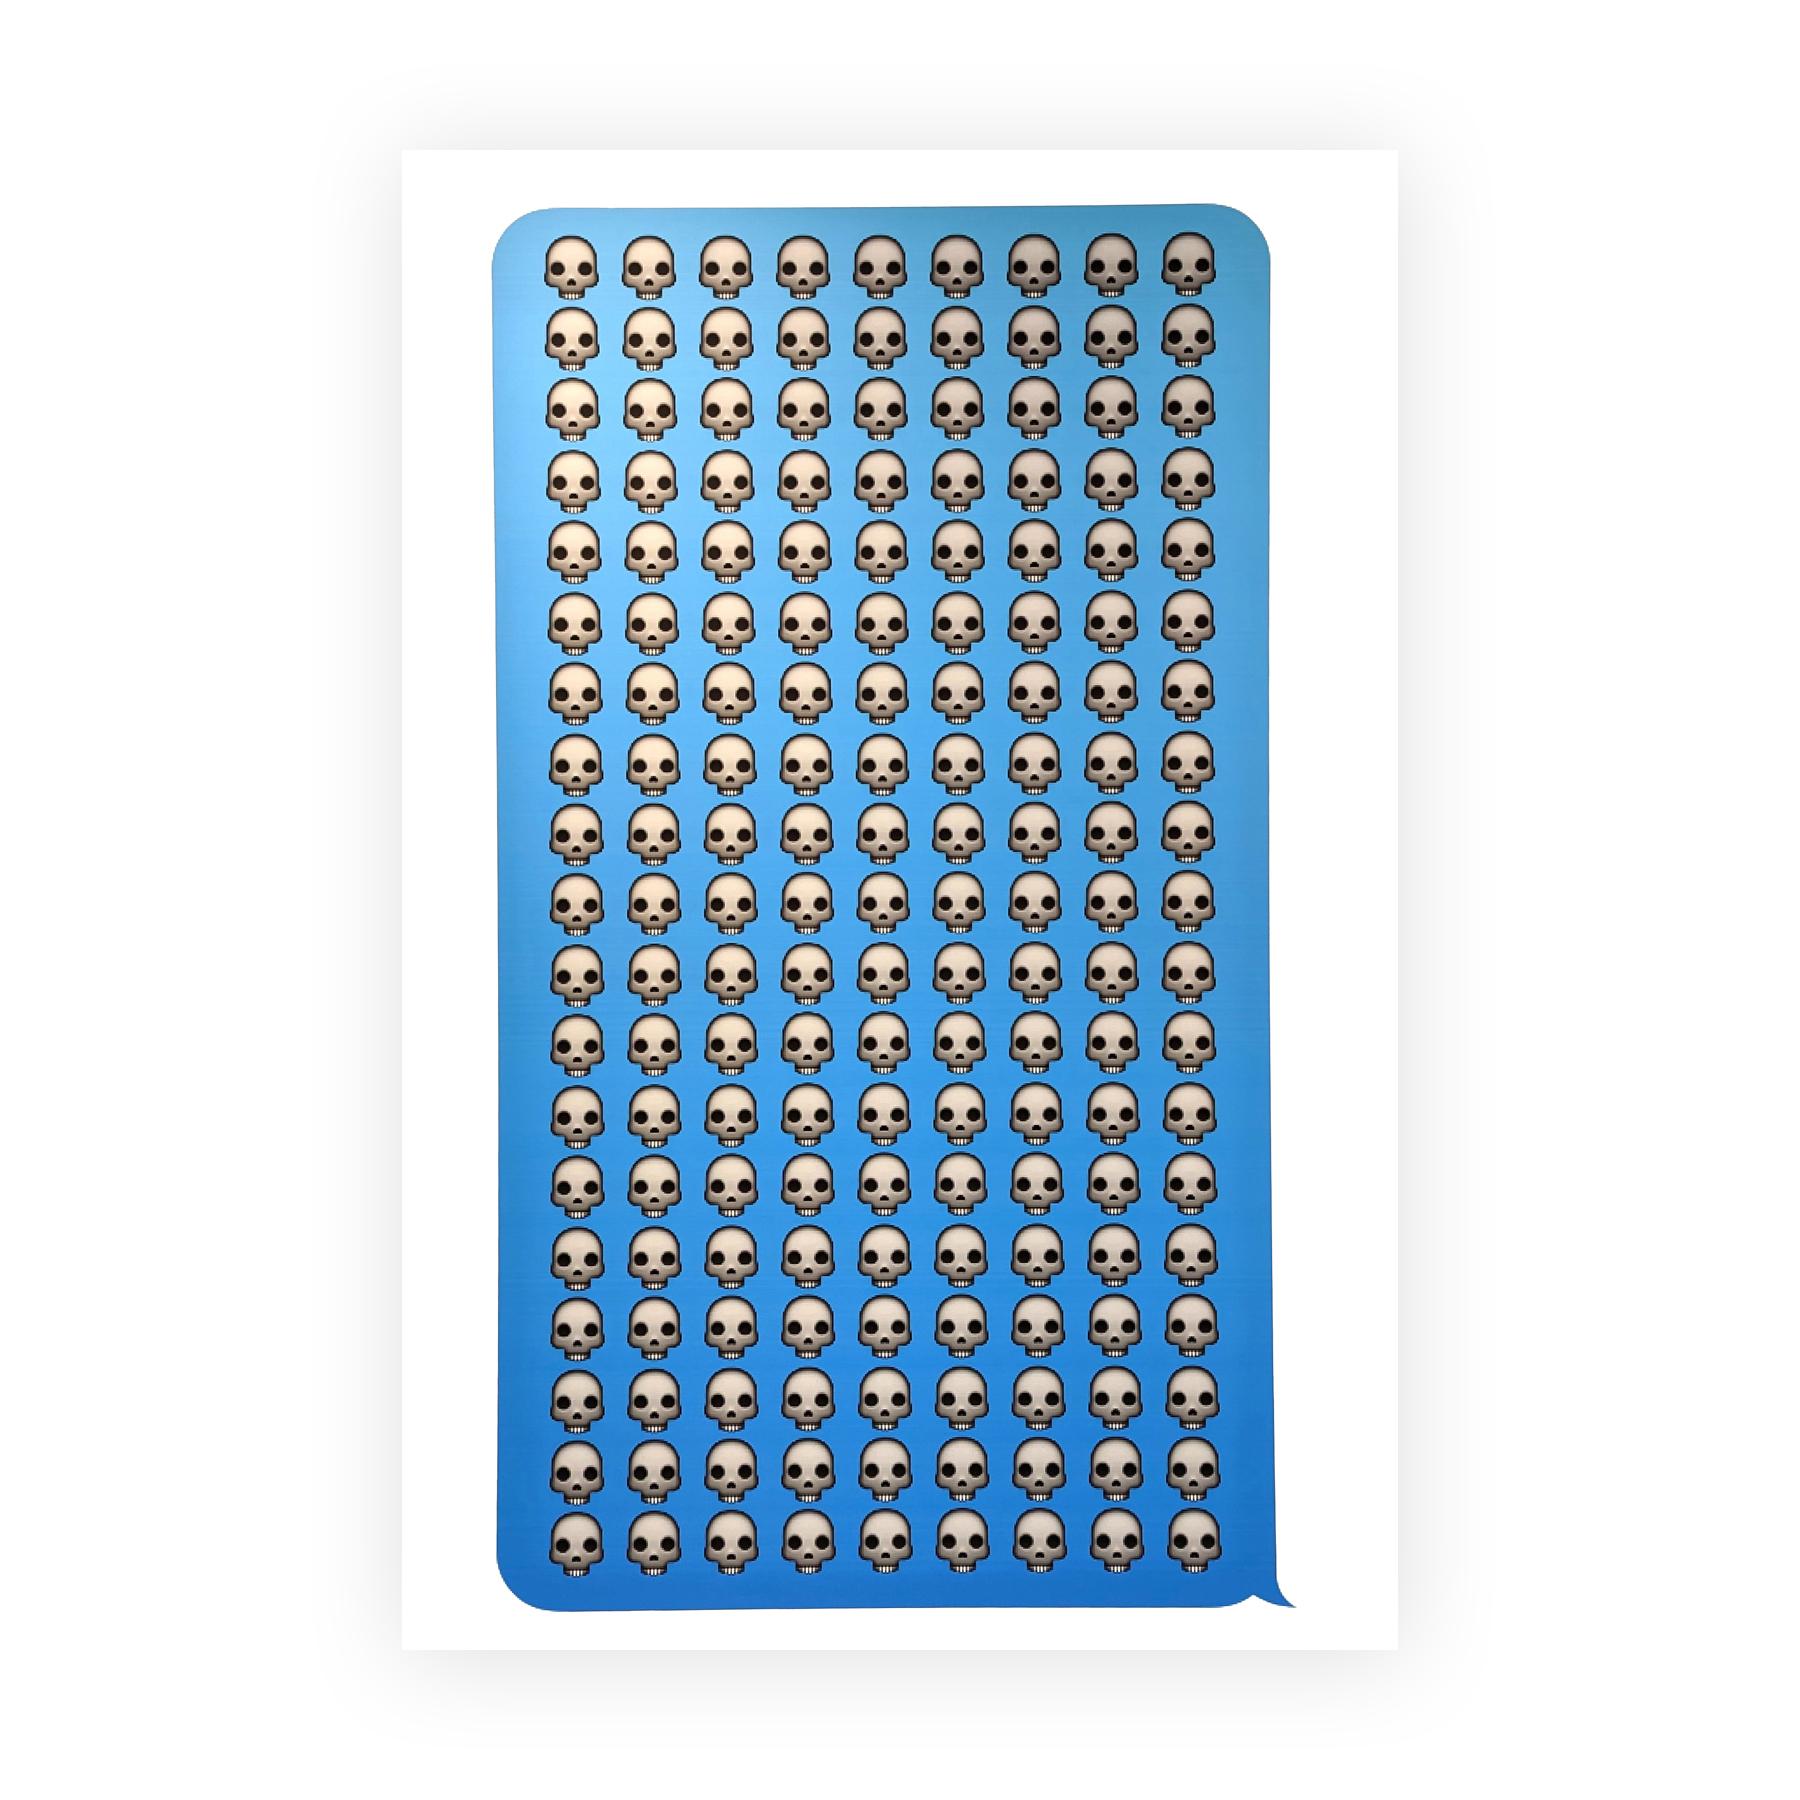 Contemporary abstract archival ink print on canvas by Houston, TX artist Mark Flood. The piece depicts a text block with 171 skull emojis. The artist signed the piece on the back of the canvas. 

Artist Biography: Mark Flood is a contemporary